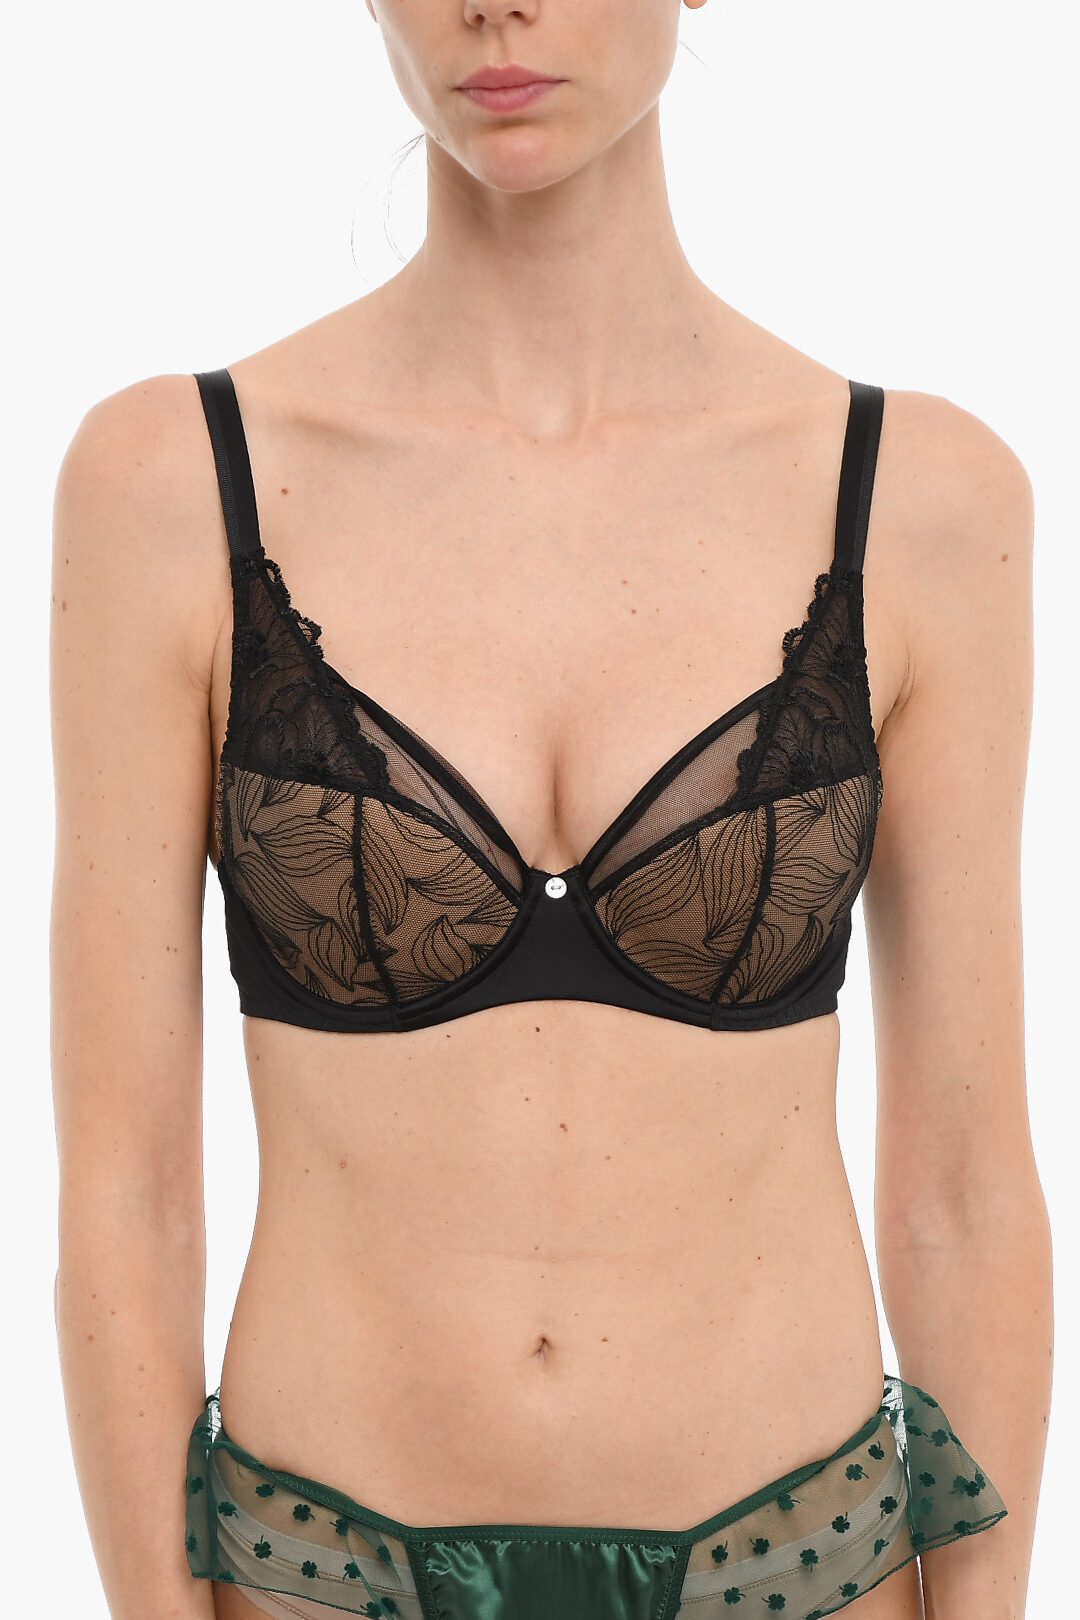 Semi-Padded FLORA Balconette Bra with Floral Embroidery